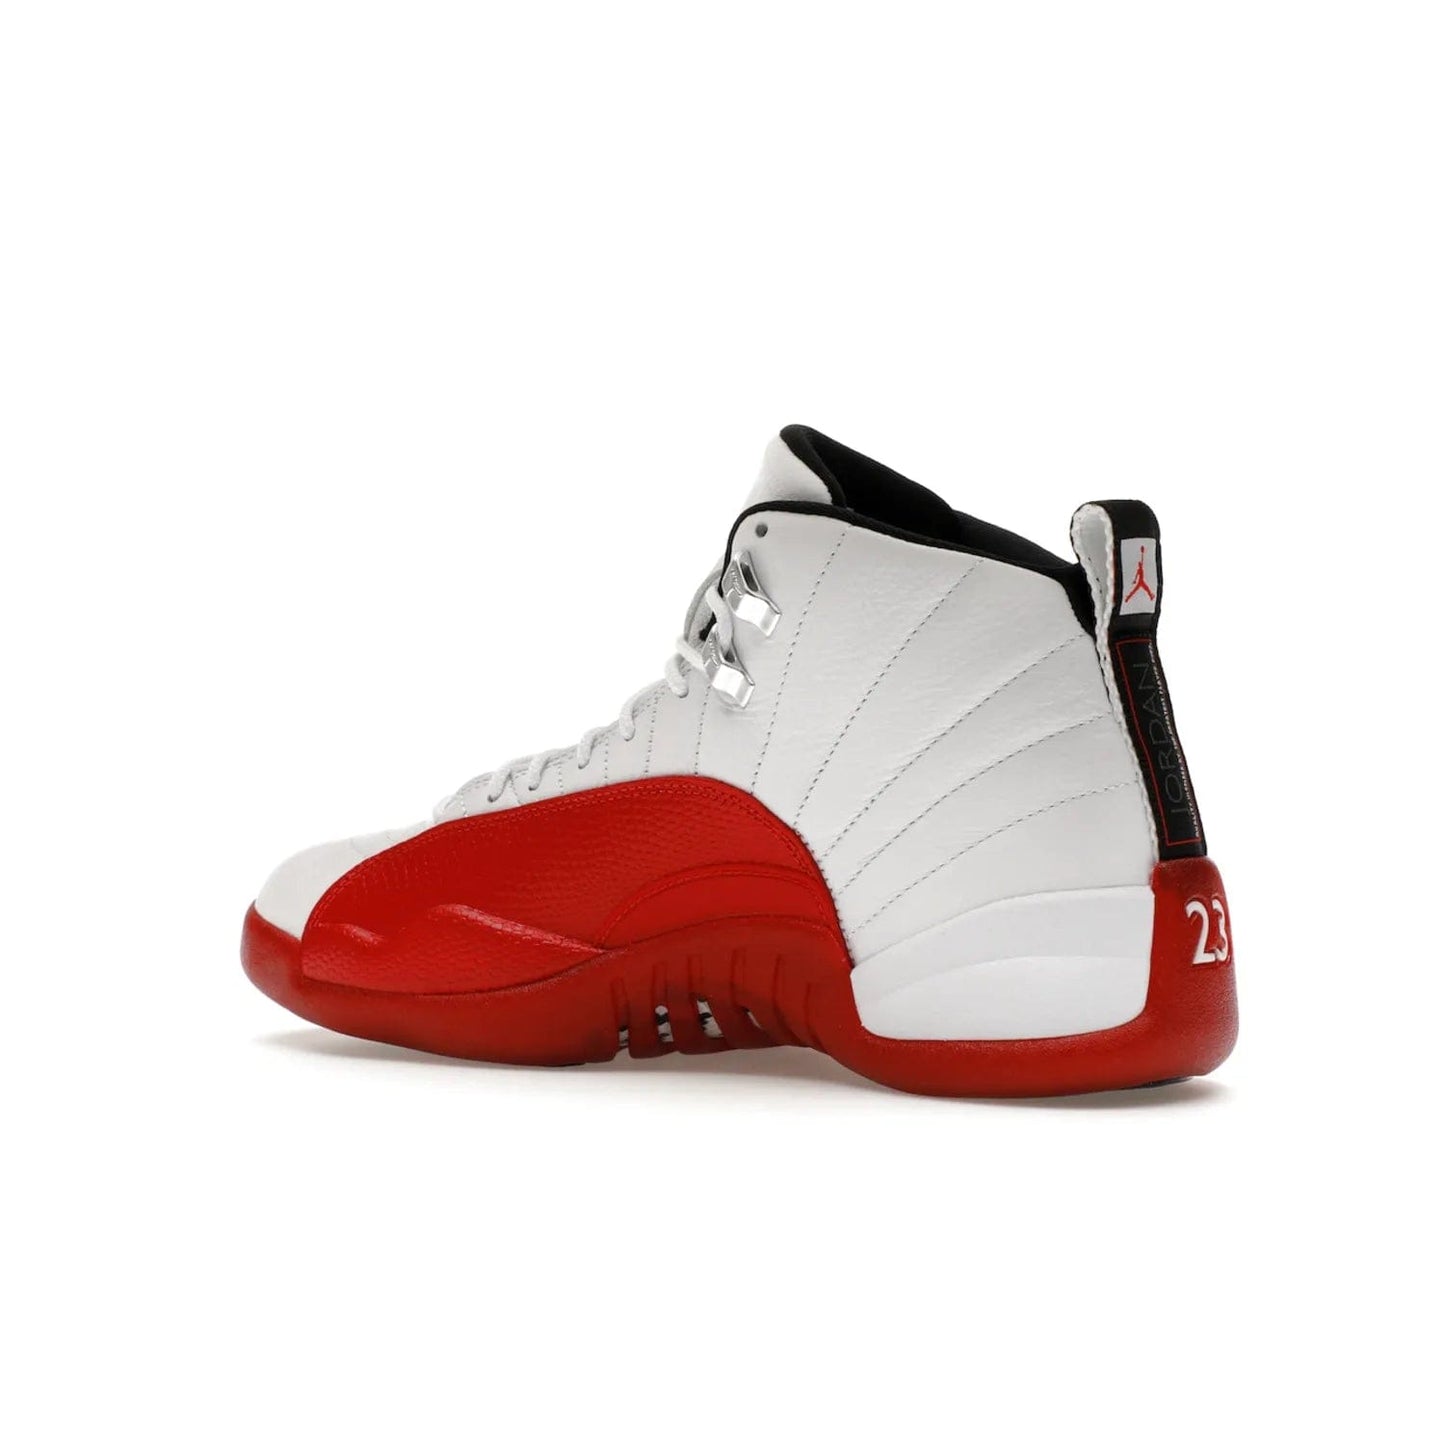 Jordan 12 Retro Cherry (2023) - Image 22 - Only at www.BallersClubKickz.com - Live your sneaker legend with the Jordan 12 Retro Cherry. Iconic pebbled leather mudguards, quilted uppers, and varsity red accents make this 1997 classic a must-have for 2023. Shine on with silver hardware and matching midsoles, and bring it all together for limited-edition style on October 28th. Step into Jordan legacy with the Retro Cherry.